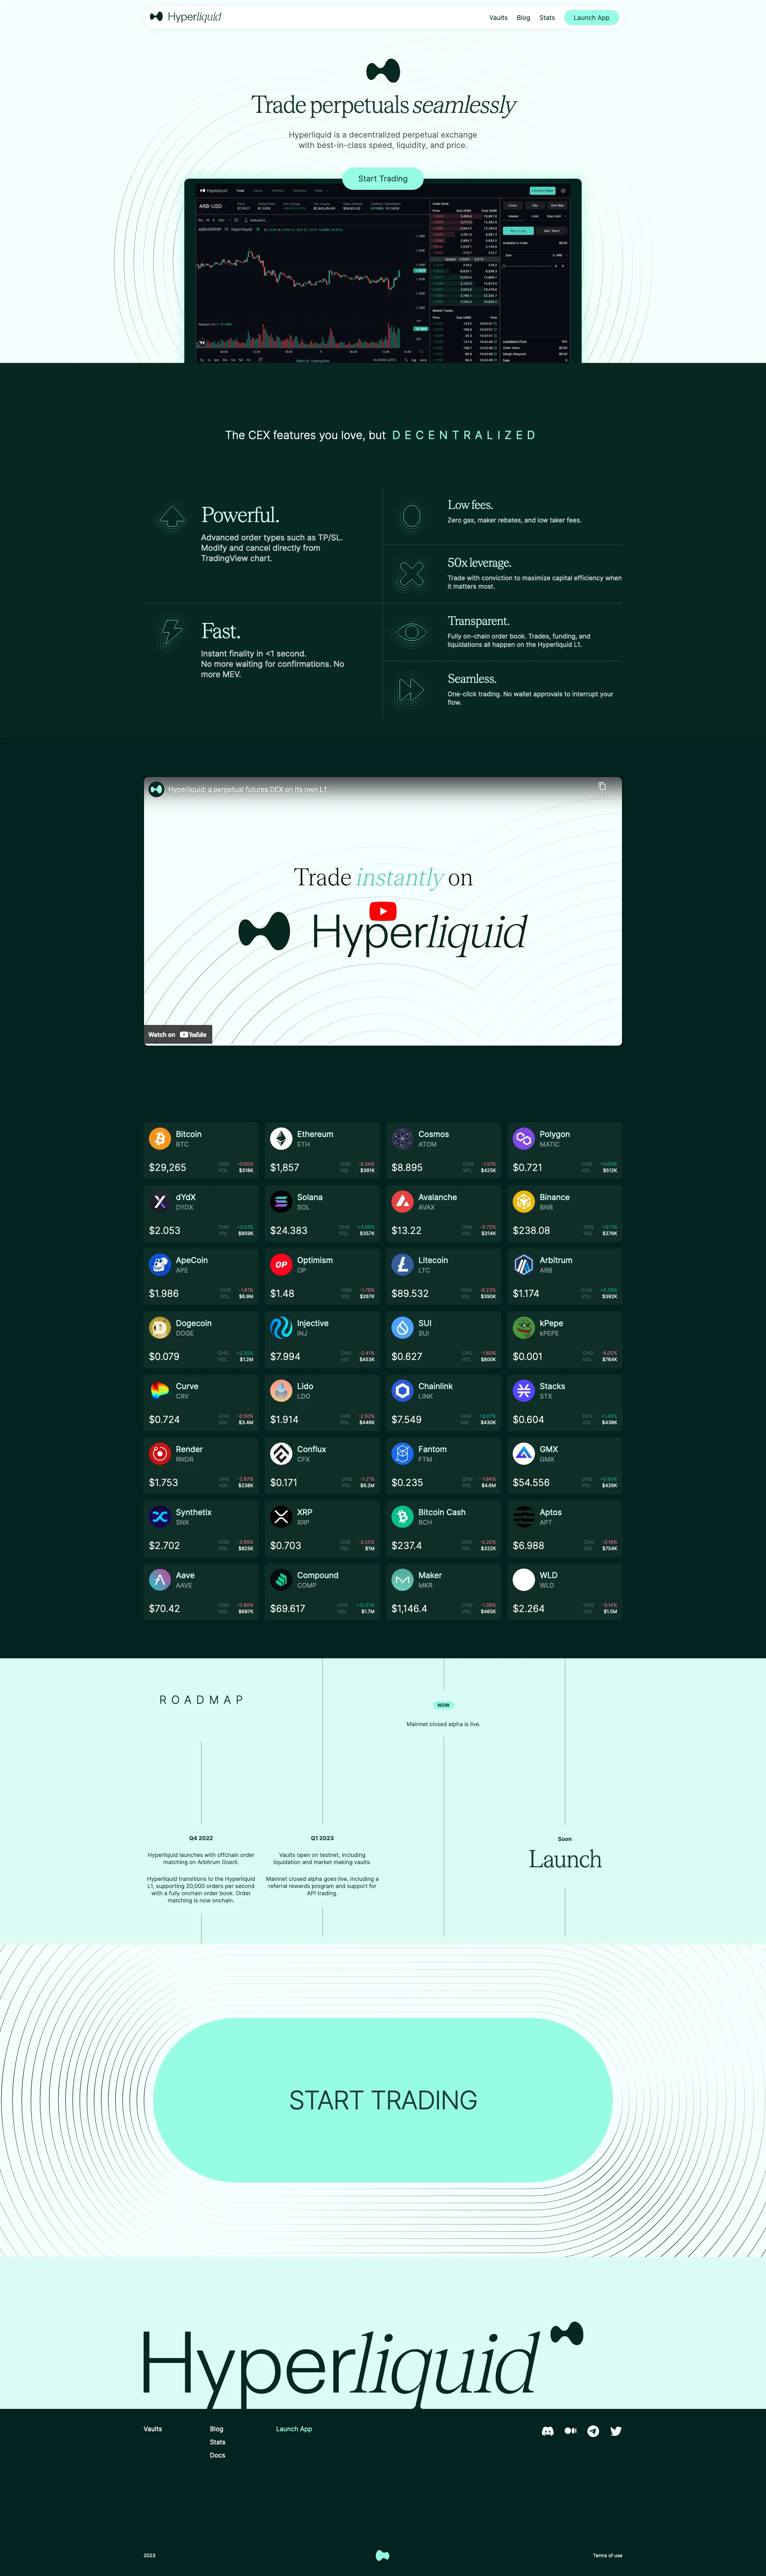 Hyperliquid Landing Page Example: Hyperliquid is a decentralized perpetual exchange with best-in-class speed, liquidity, and price.